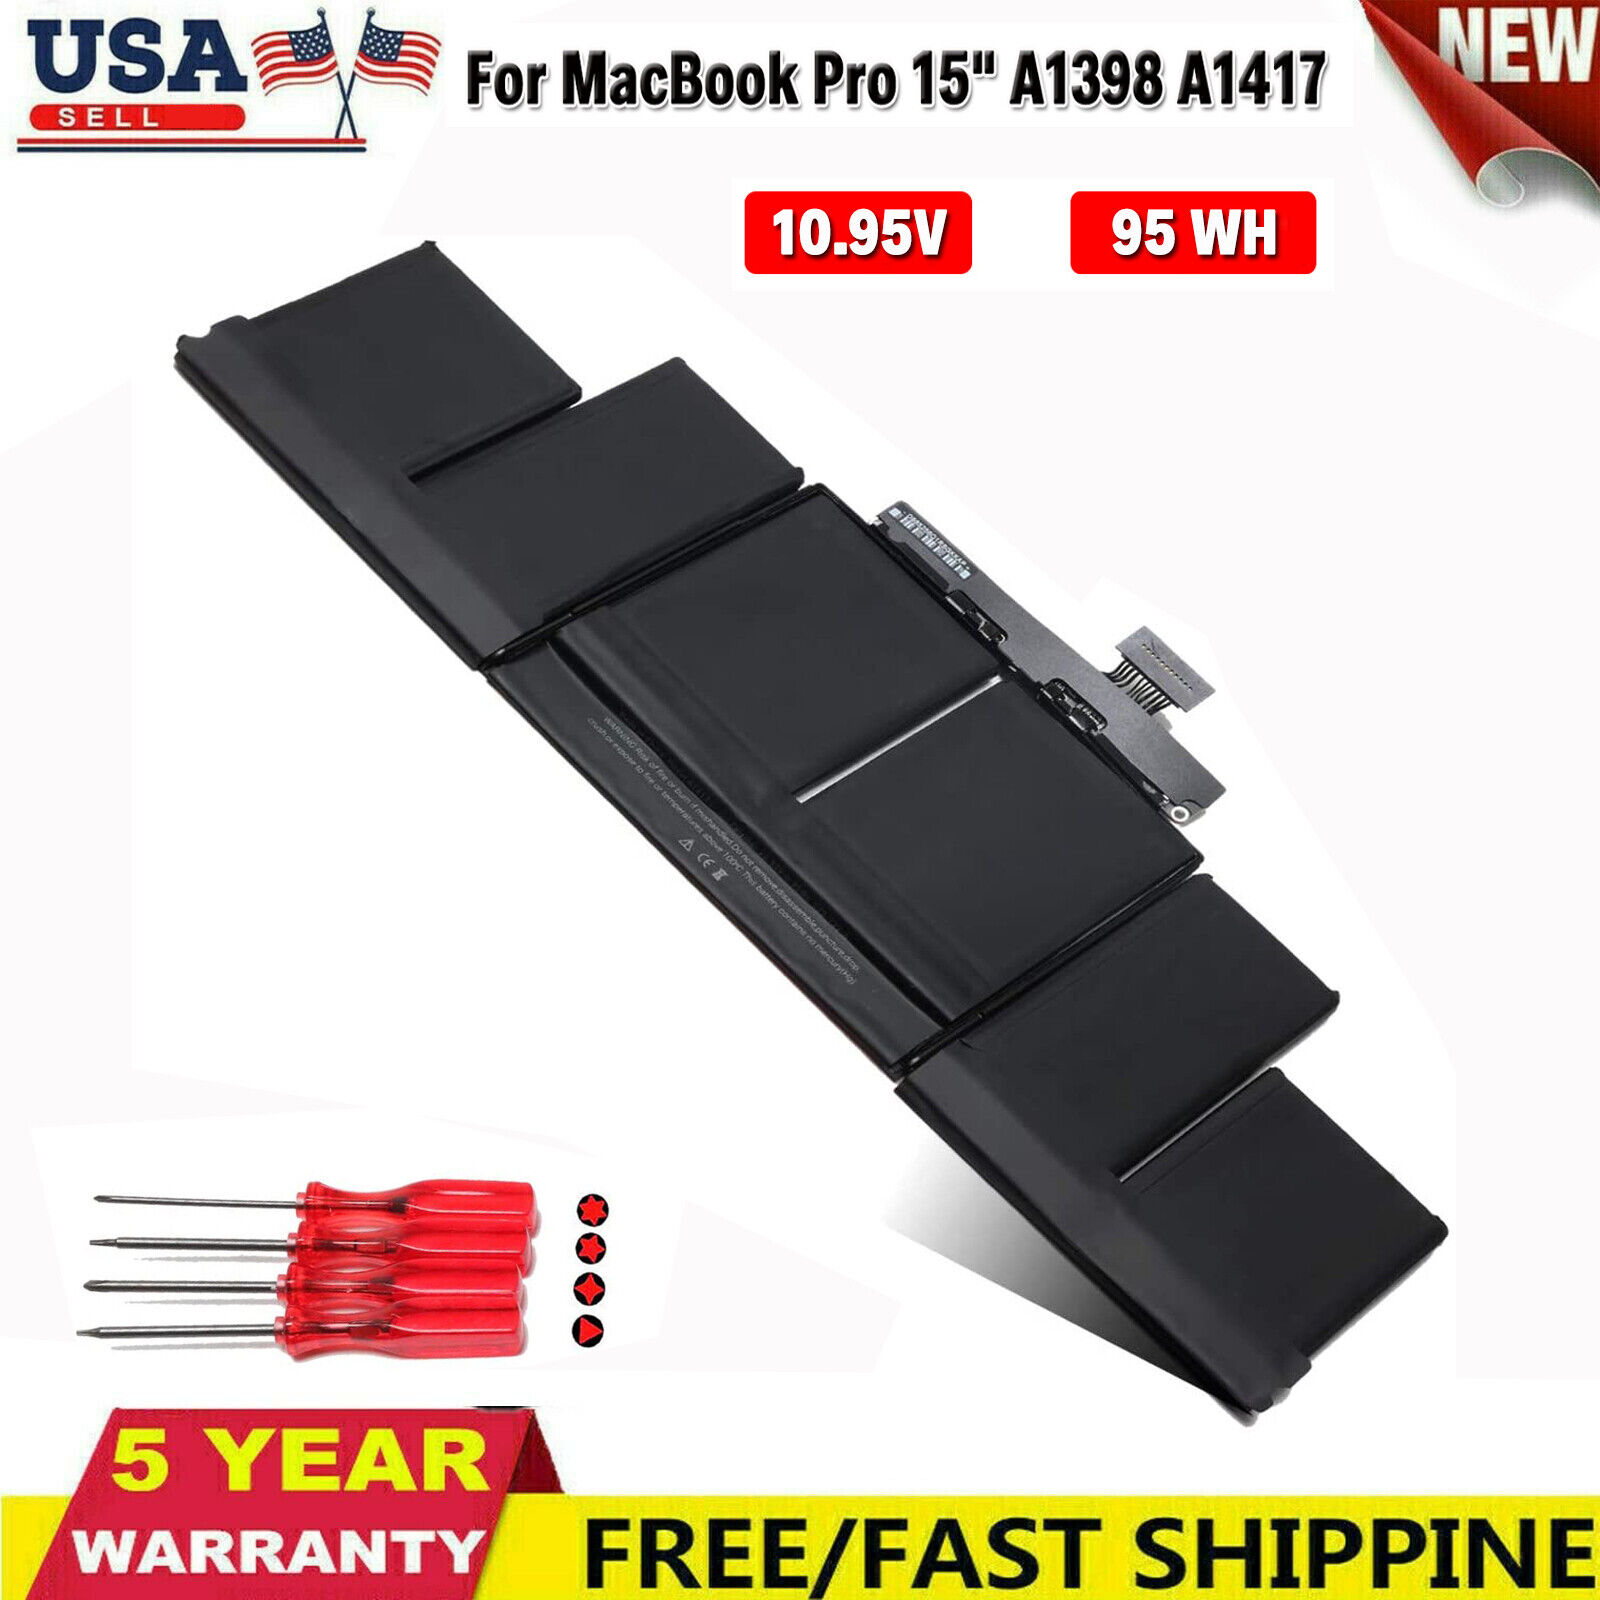 Genuine A1417 OEM Battery Apple Macbook Pro 15 Retina A1398 Mid 2012 Early 2013